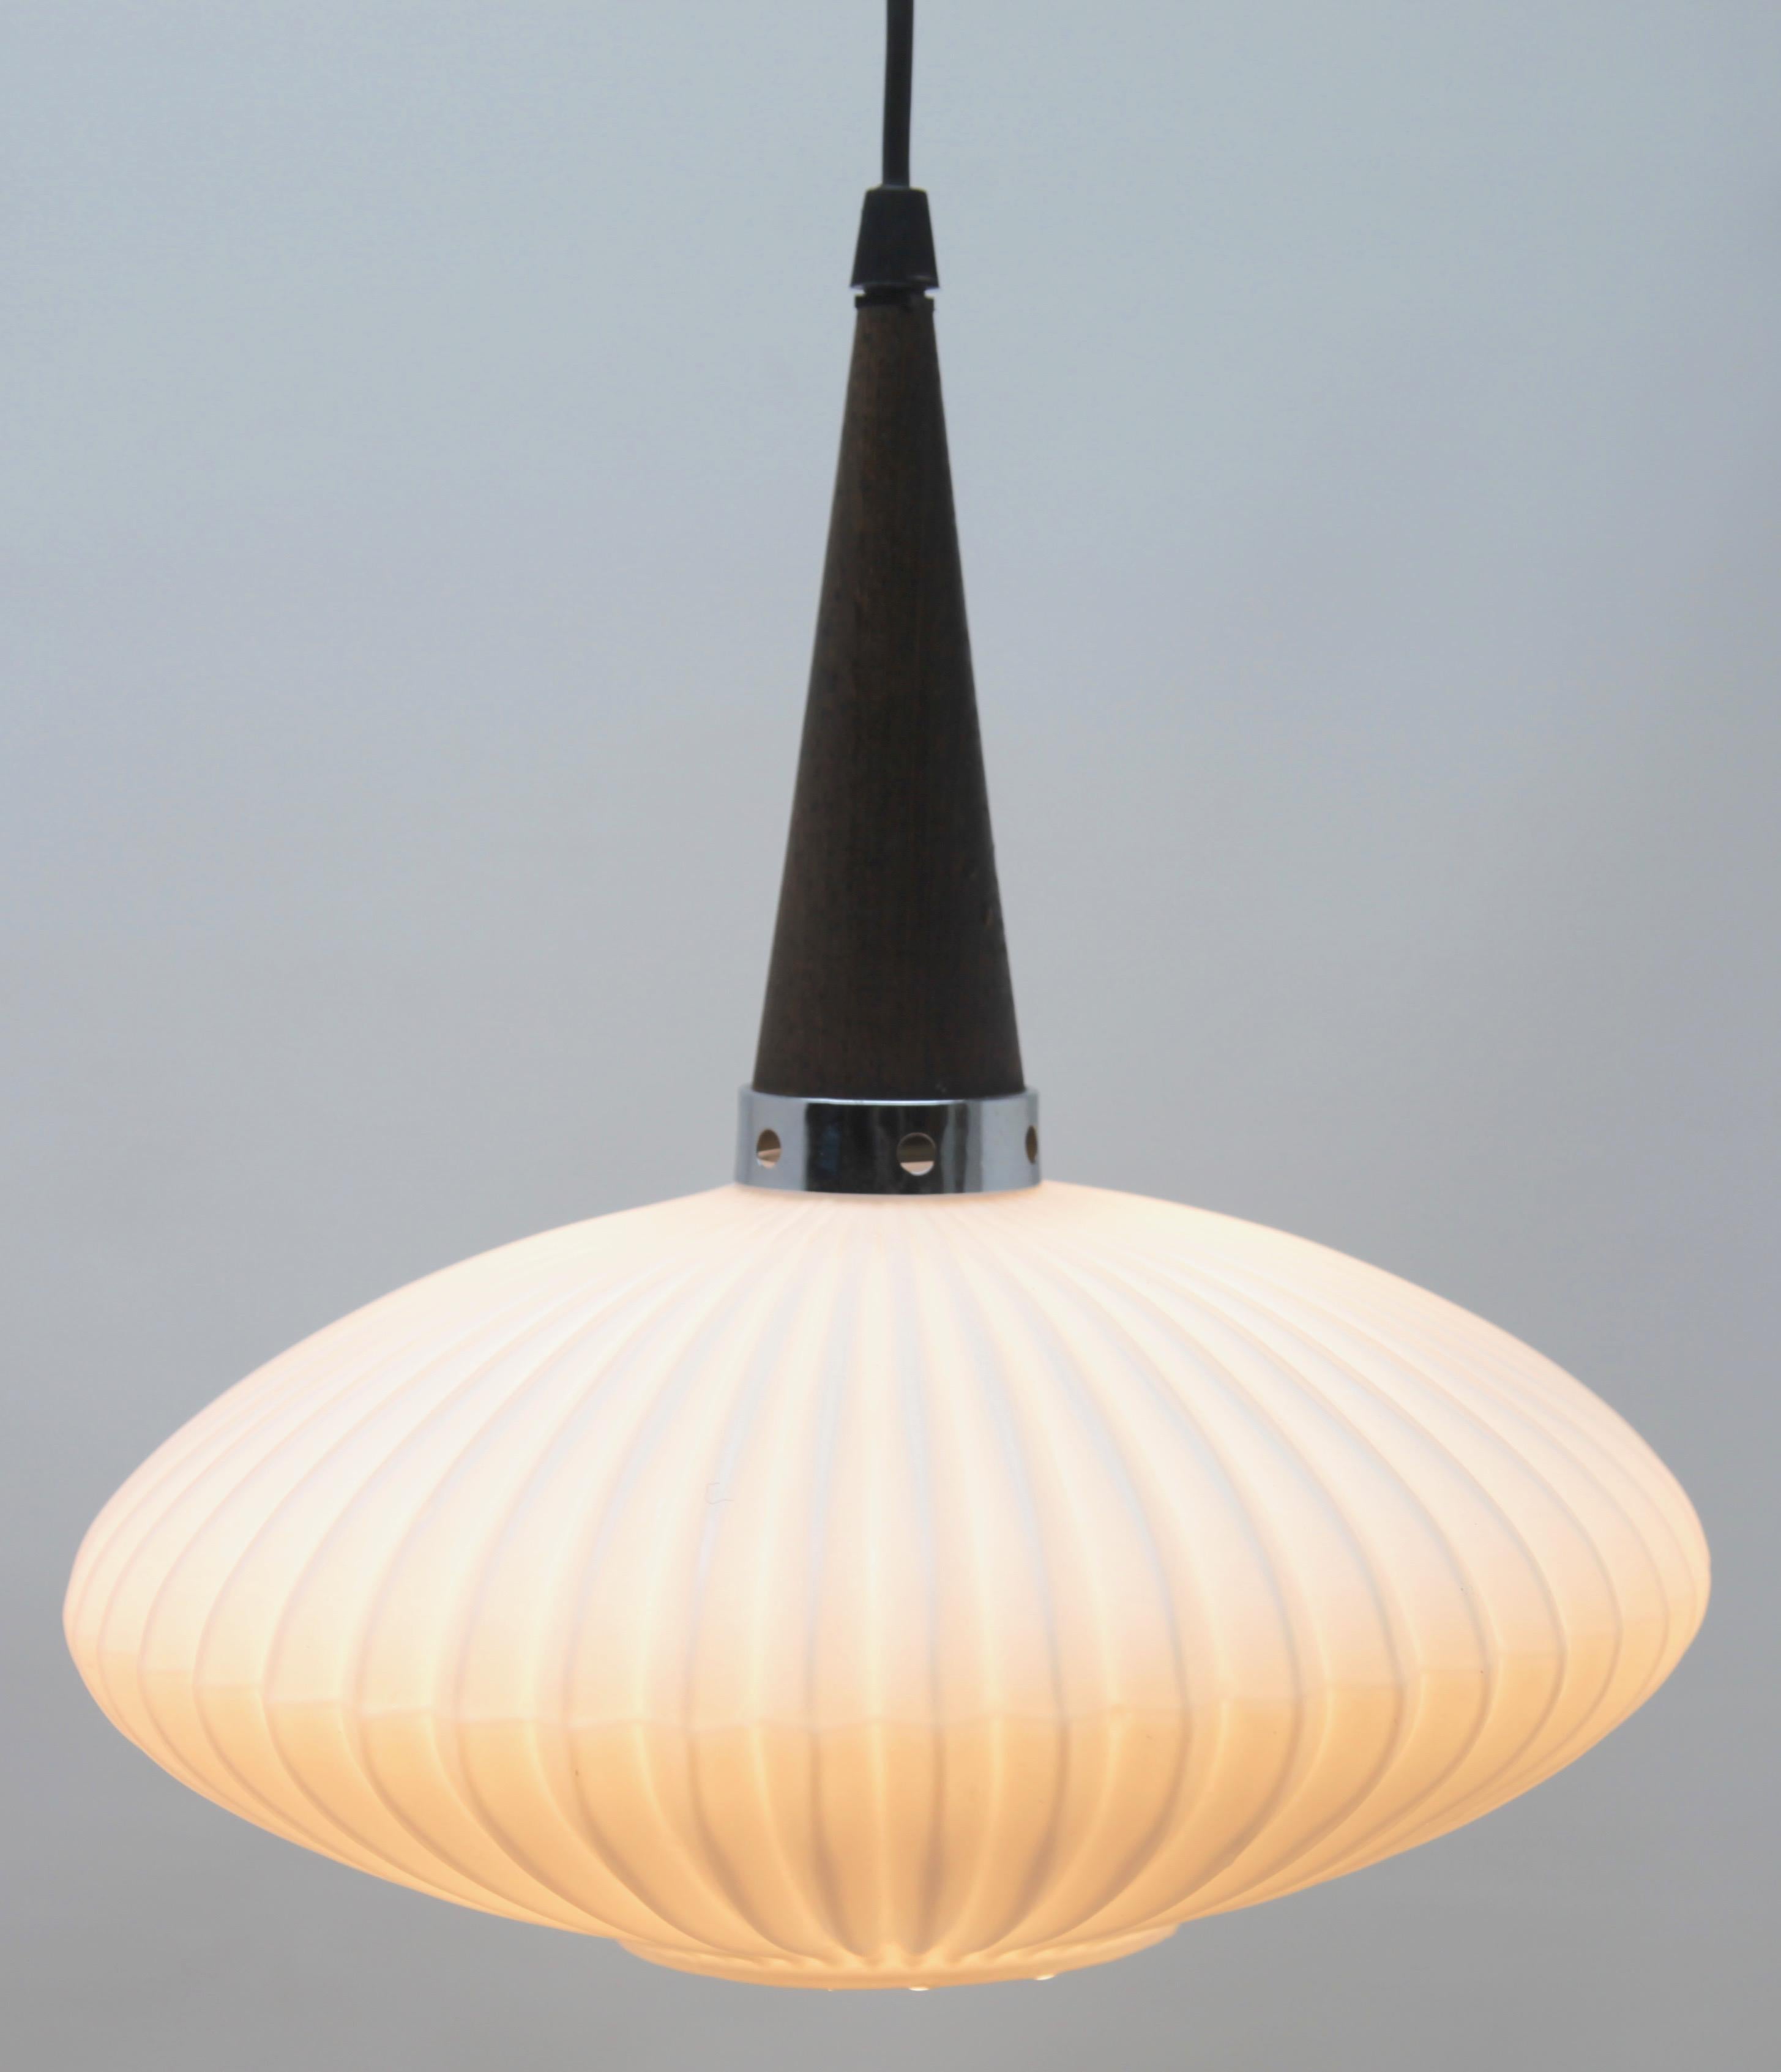 Hanging pendant light from the late 1960s on an adjustable cable, designed in the Scandinavian style with Wenge wood and an opaline shade. Its Classic modernist form and simplicity in design, make it an iconic example of midcentury home